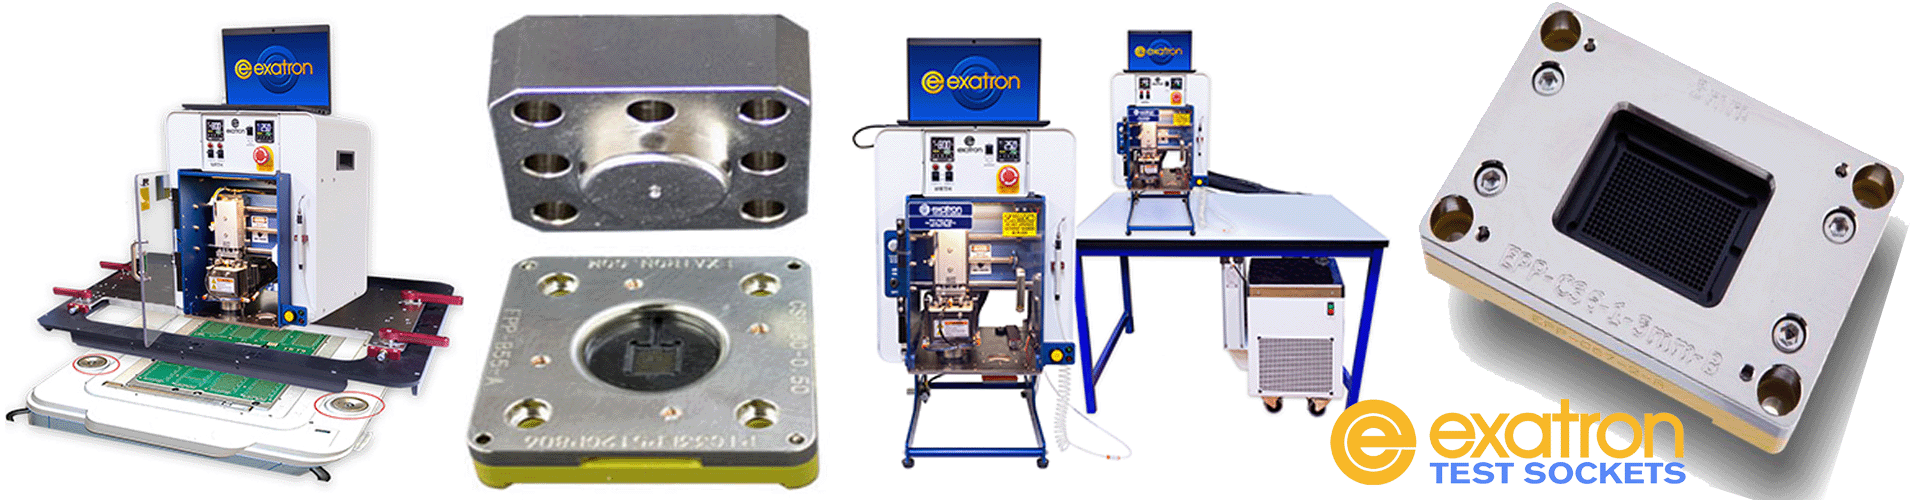 Exatron Thermal Forcing Test System, Direct Conduction not thermal stream or Peltier